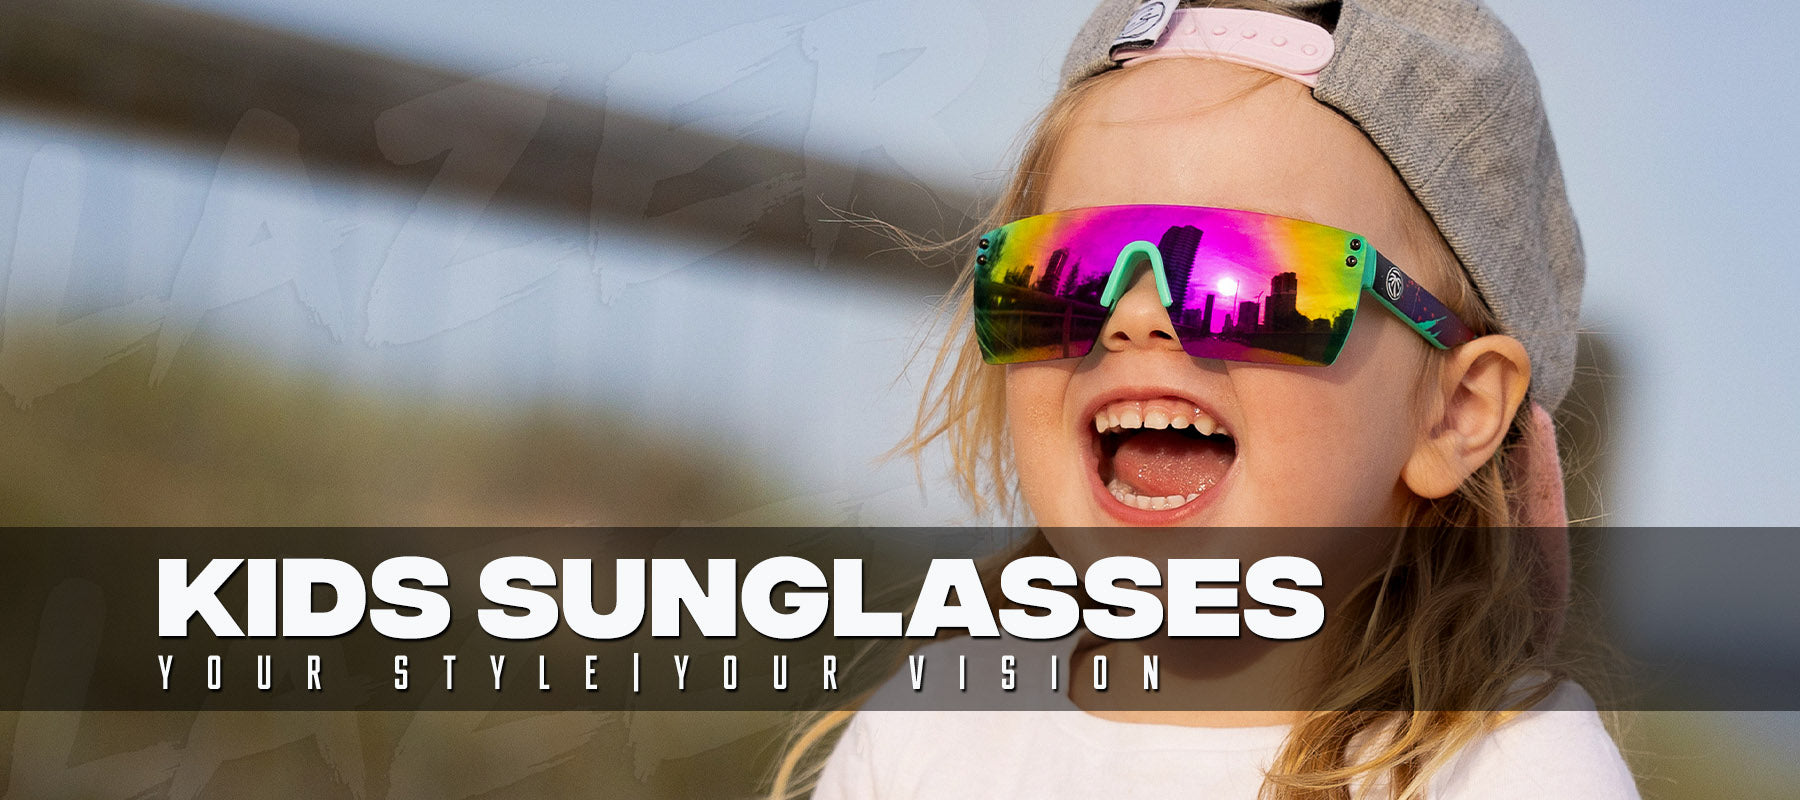 Shop Official Heat Wave Visual Australia. Free Same Day Shipping. Heat Wave Sunglasses. Your Style Your Vision. Heat Wave Protective Eyewear. Kids Sunglasses. Lazer Face. Polarized Sunglasses. Born in California Now Available In Australia